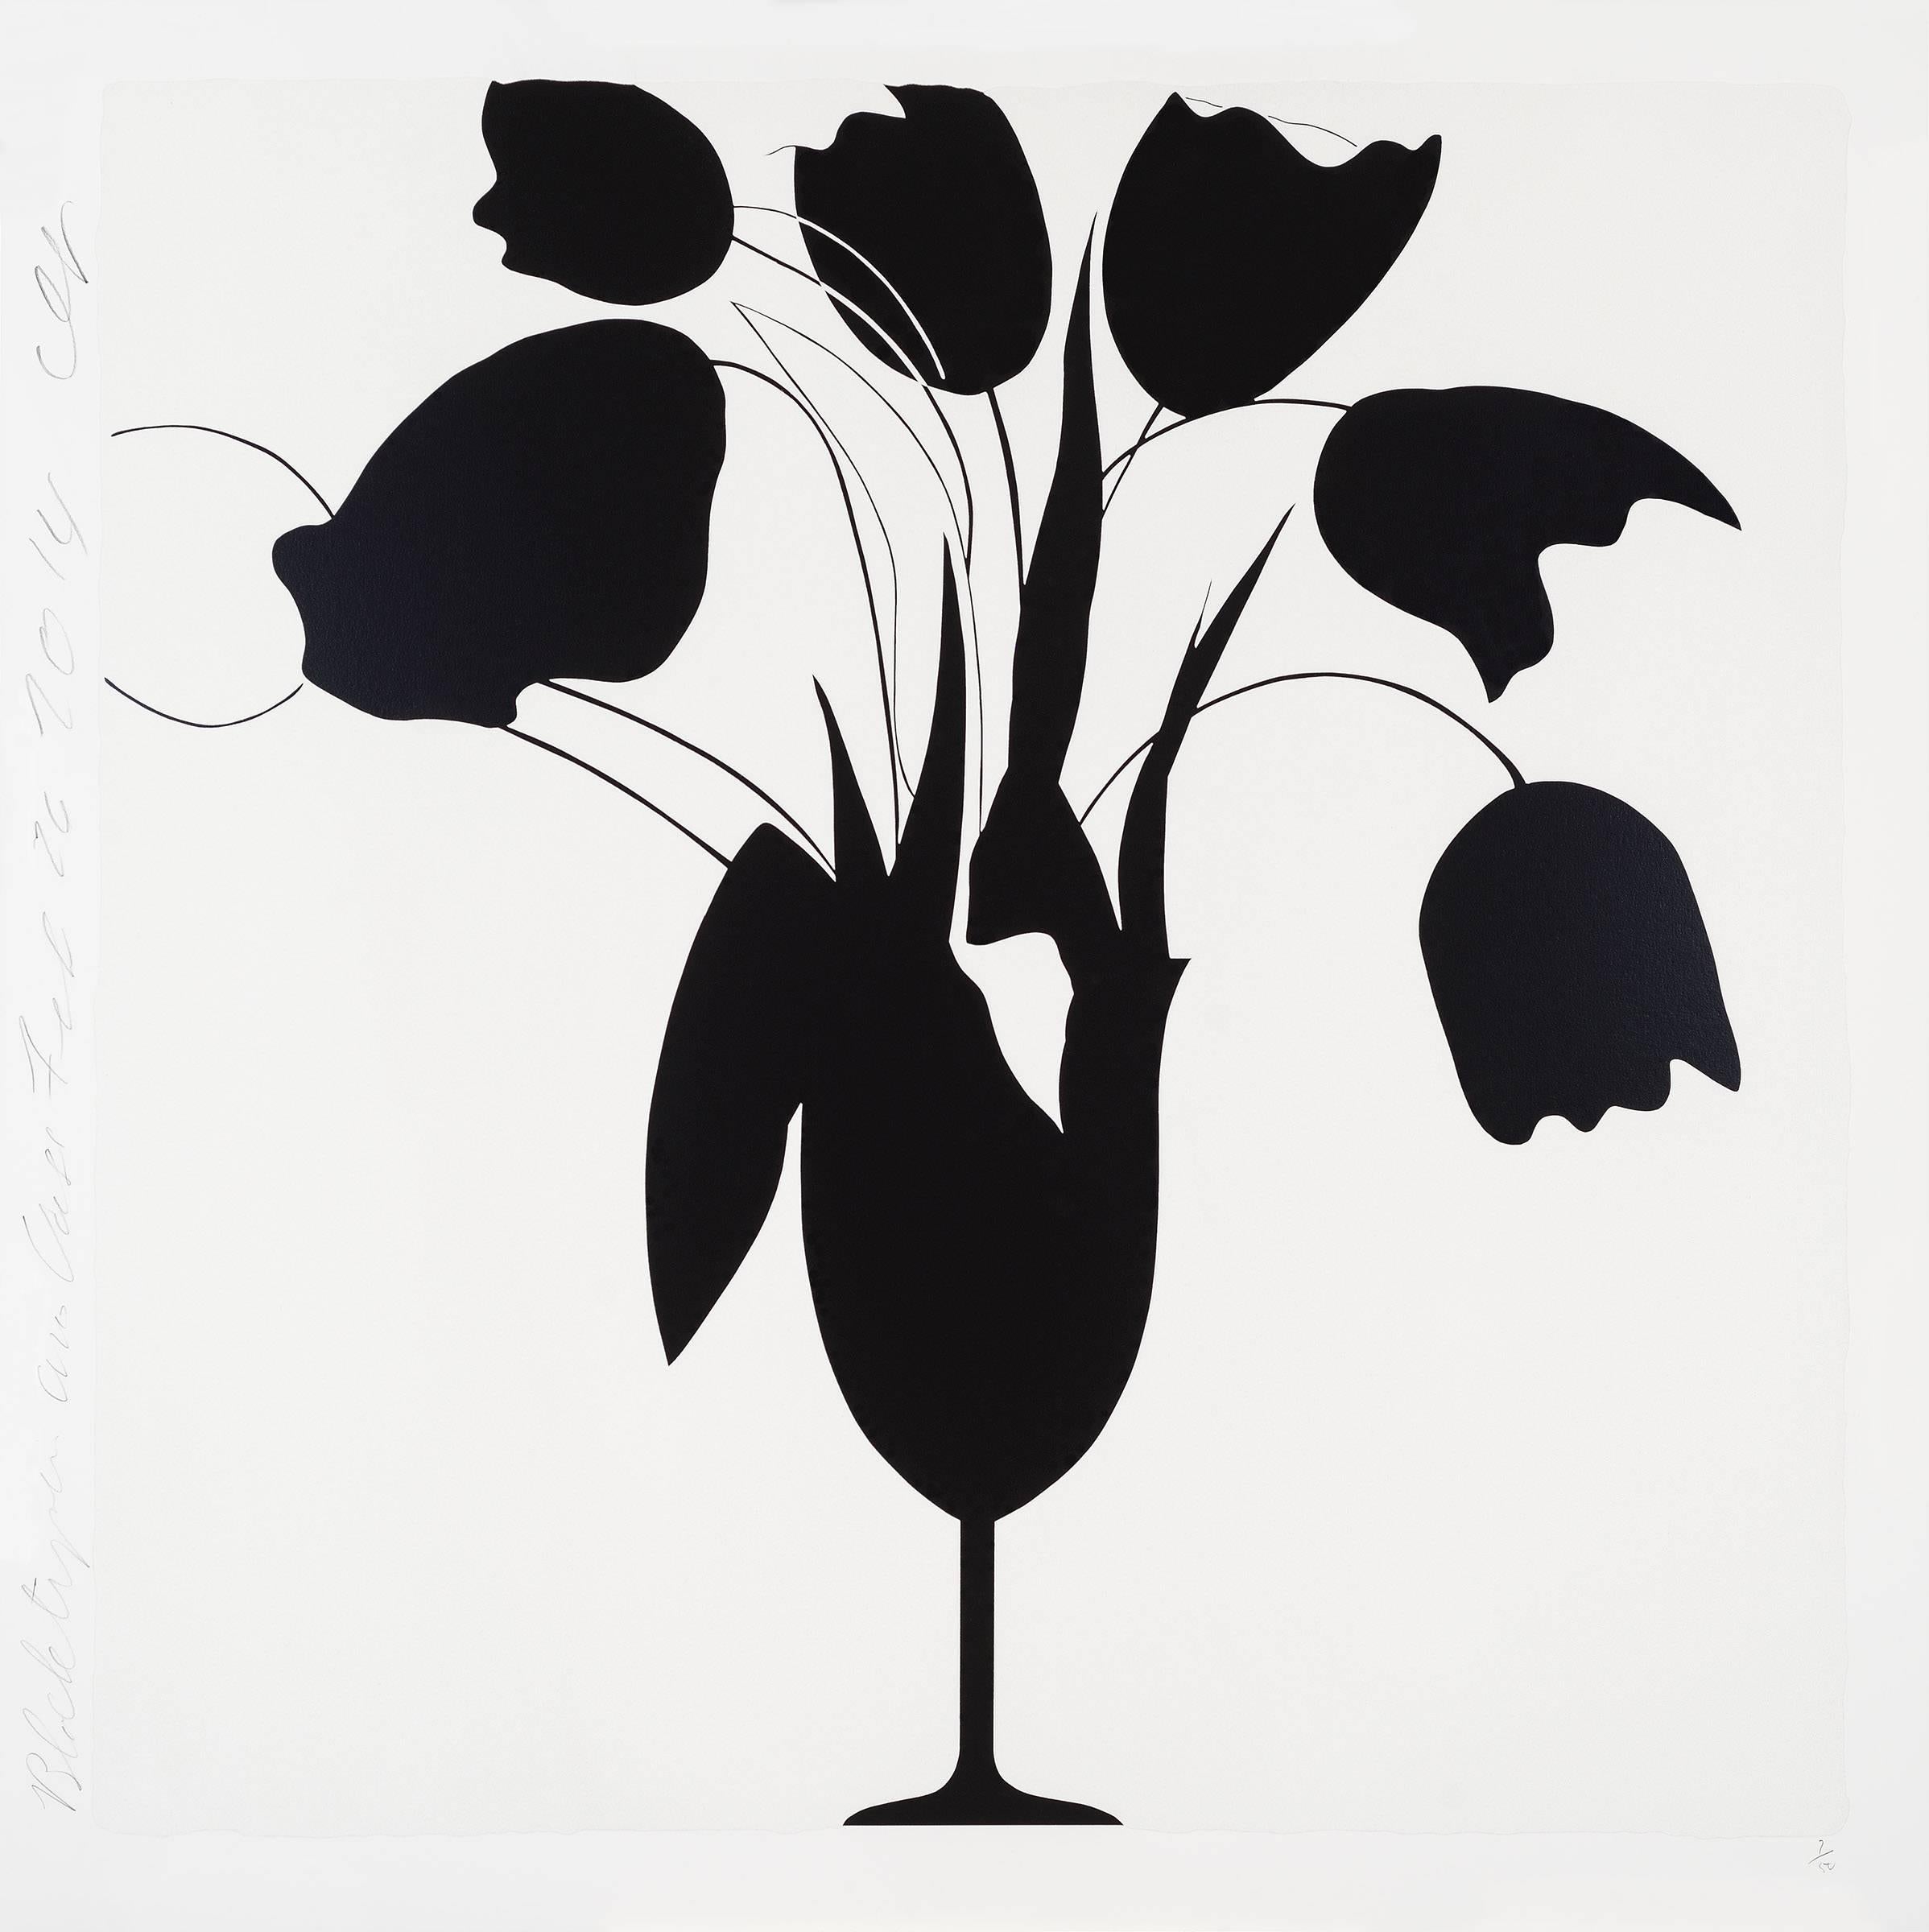 Black Tulips and Vase - Print by Donald Sultan